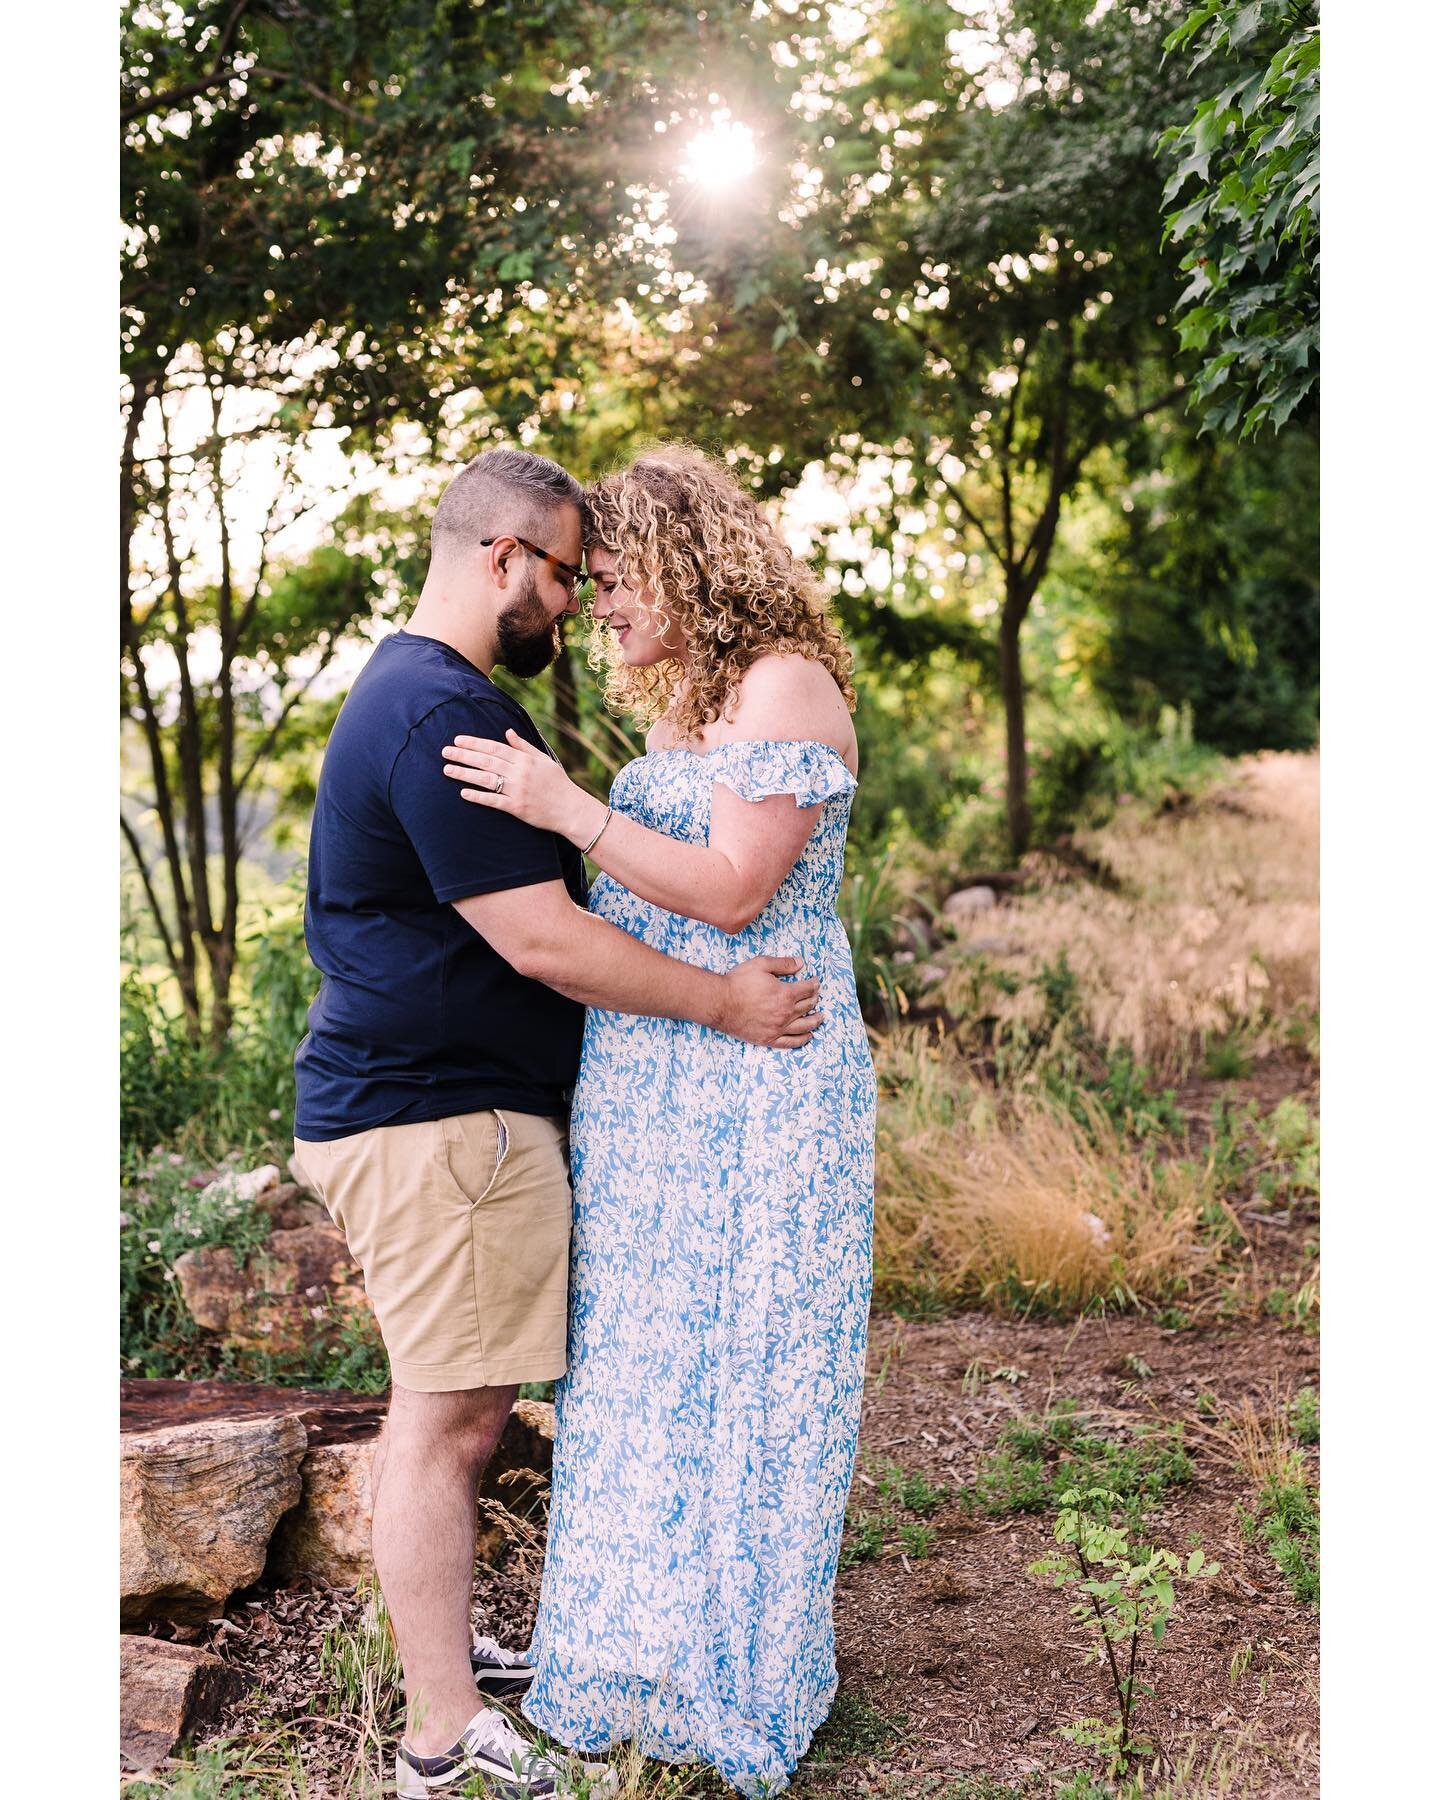 We&rsquo;ve done engagement pics, wedding pics, a fun little Christmas session, and now maternity 😭💙

Can&rsquo;t wait to see this sweet baby boy, and my heart is so full to get to keep capturing these sweet memories!